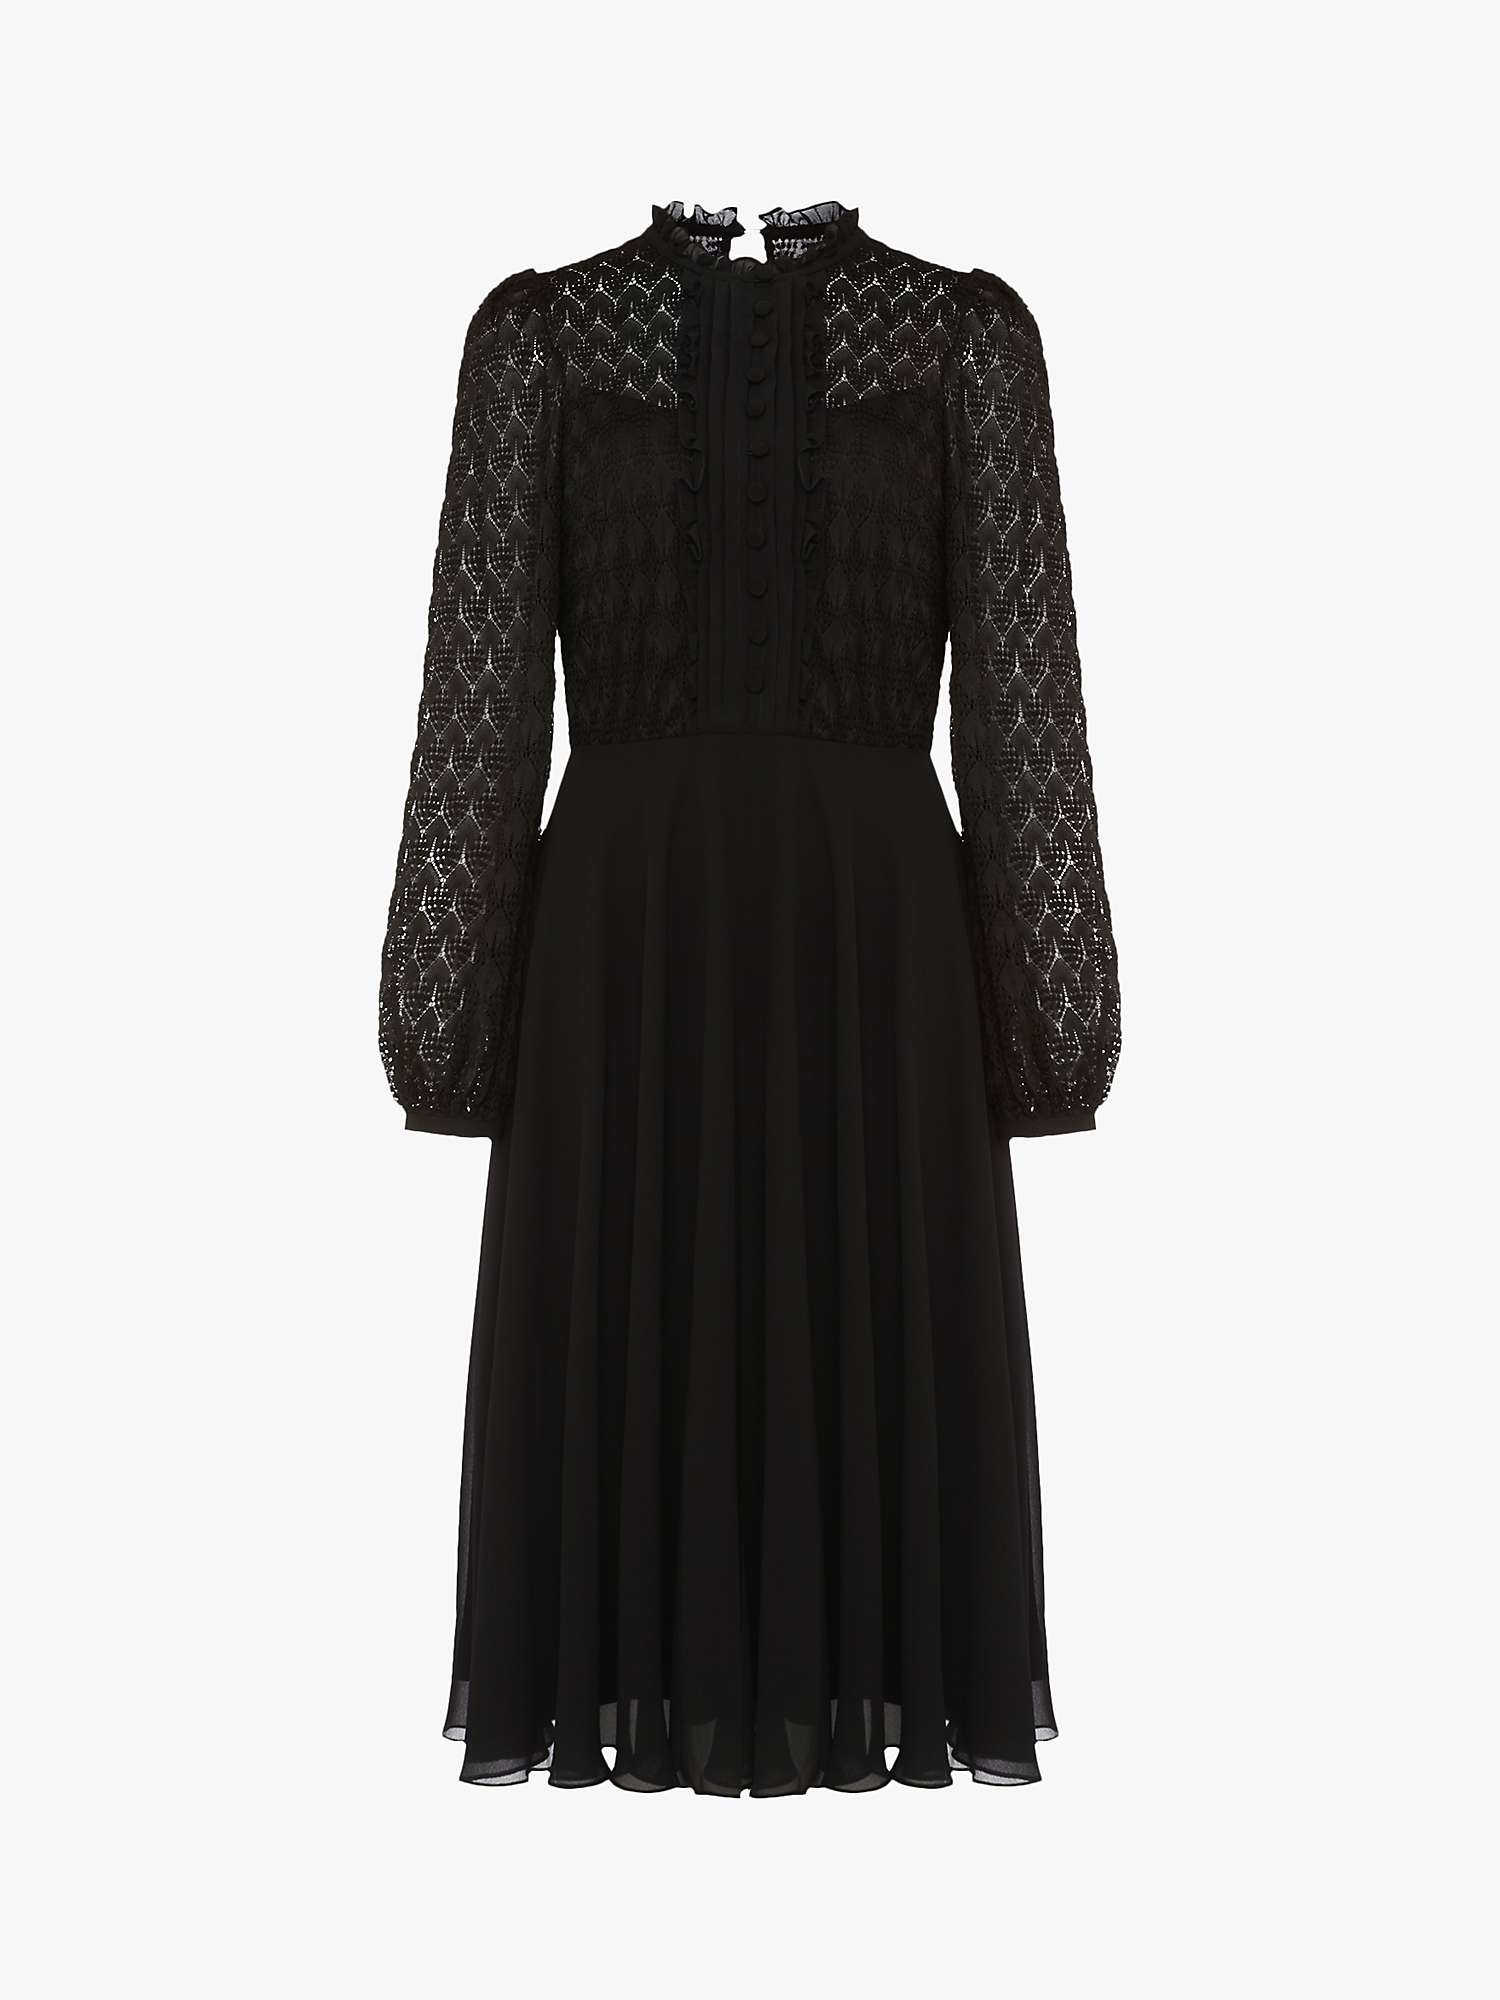 Phase Eight Leonore Lace Bodice Dress, Black at John Lewis & Partners